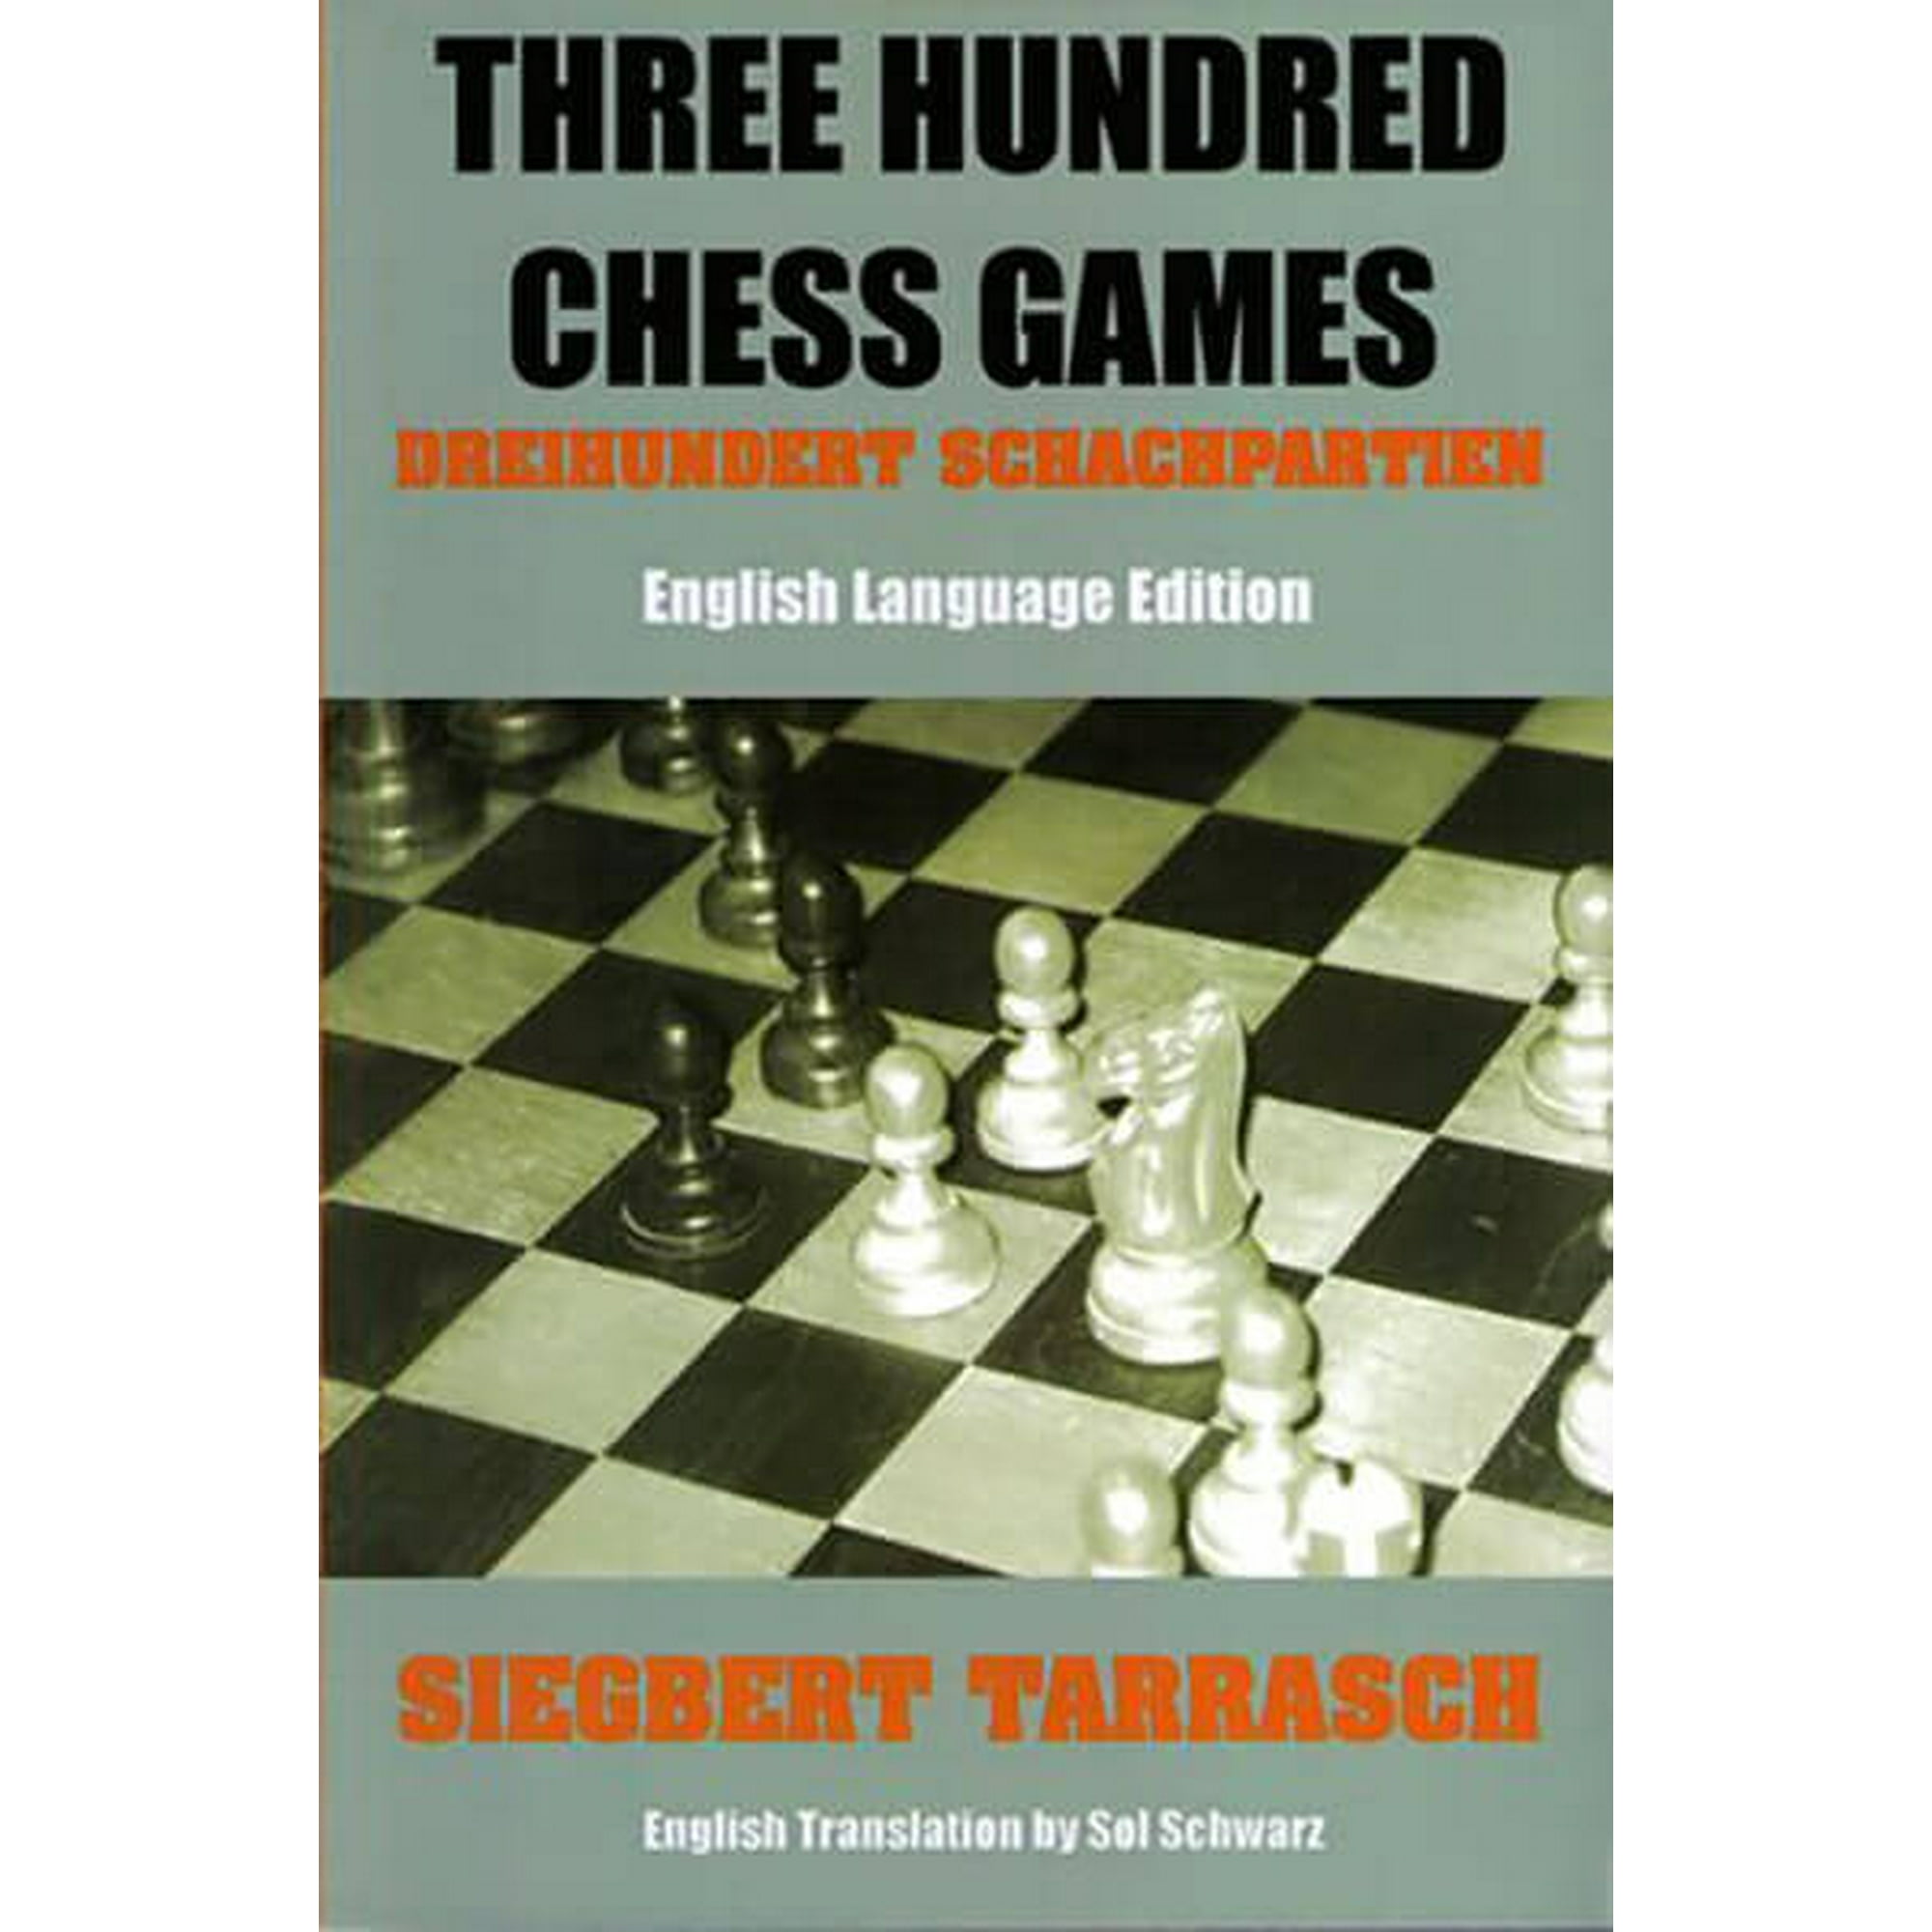 The chess games of Paul Morphy